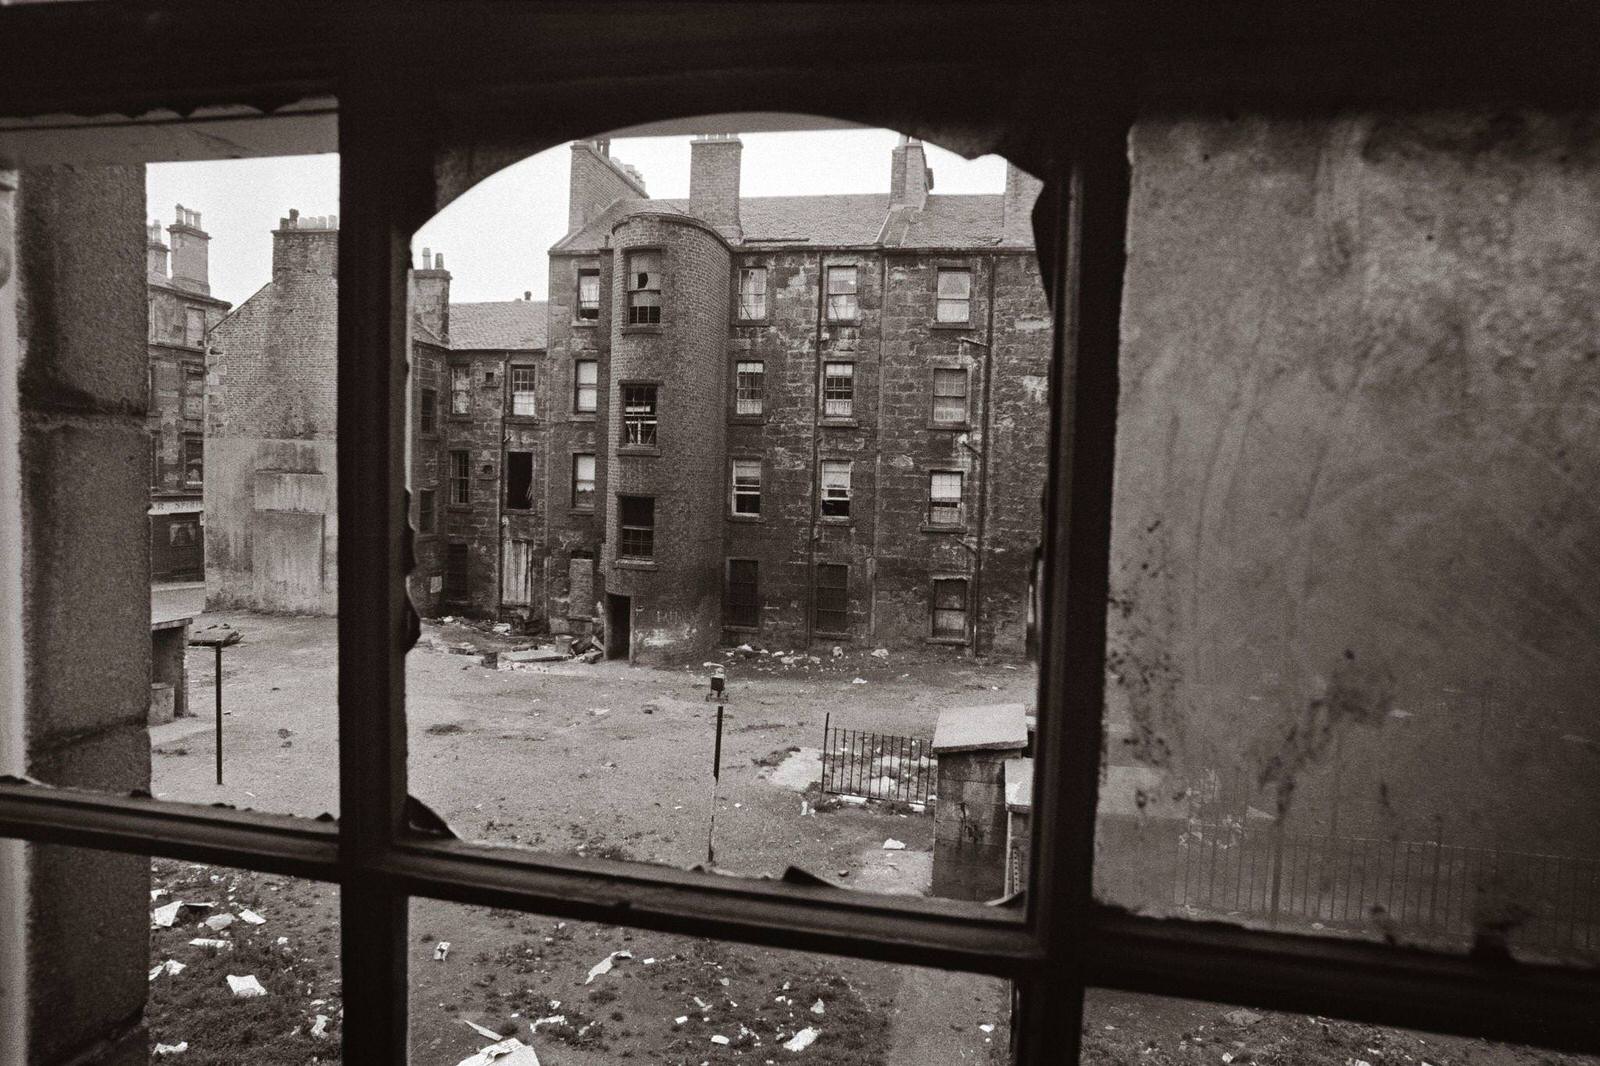 The view from a smashed window in the Gorbals area of Glasgow, 1968.